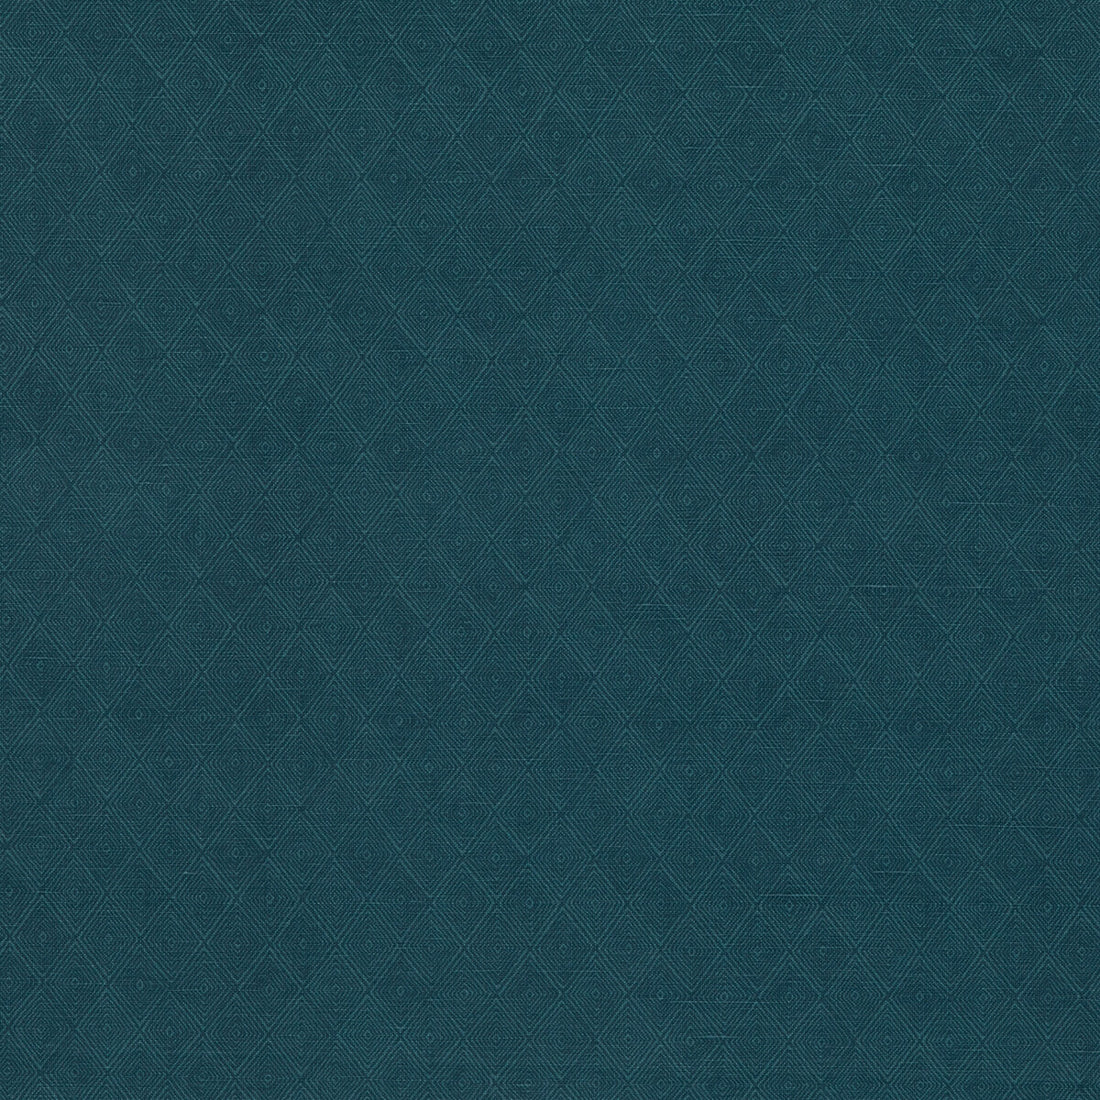 Boundary fabric in teal color - pattern ED75042.1.0 - by Threads in the Nala Prints collection